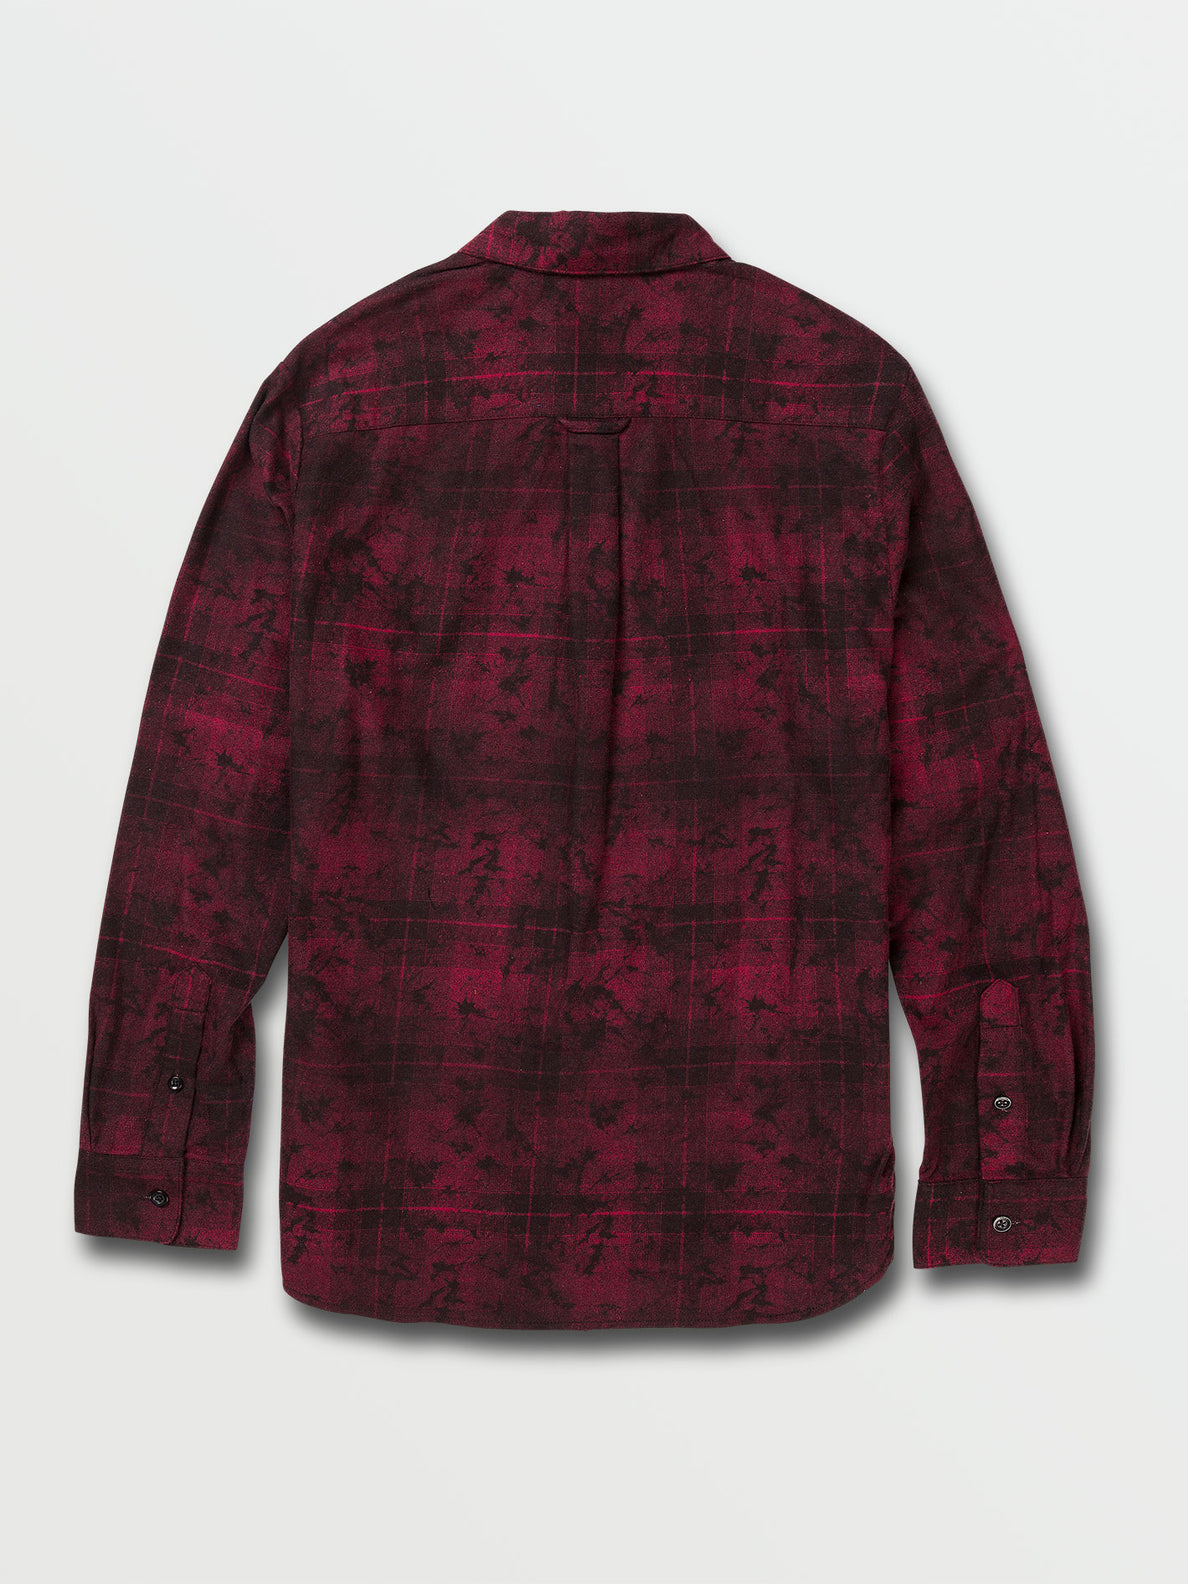 Office Party Long Sleeve Flannel - Port (A0542101_POR) [B]